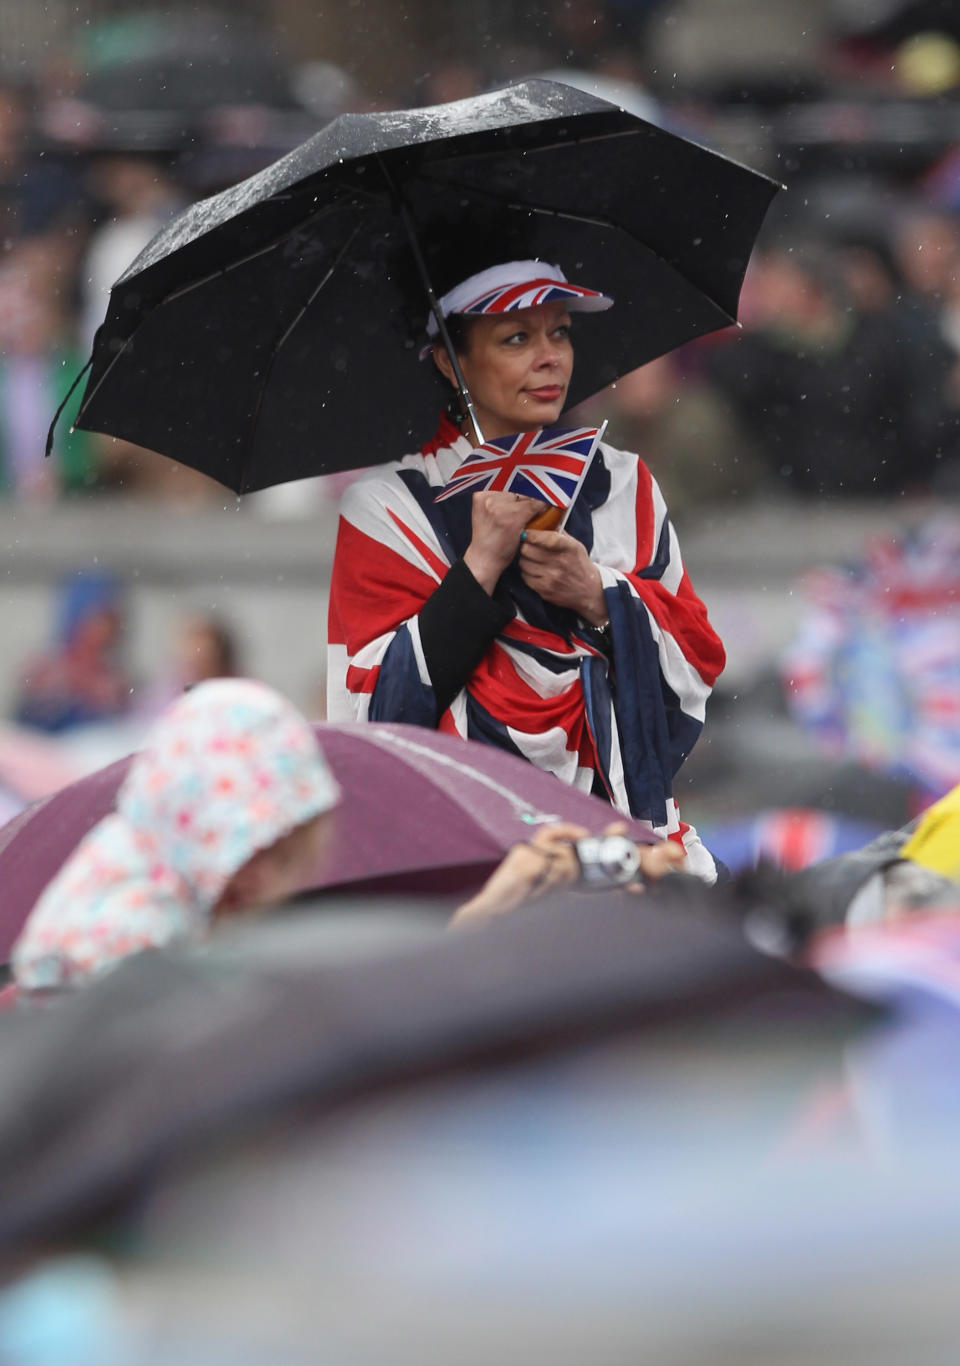 A reveller holds an umbrella in Trafalgar Square as she watches a large screen television monitor showing the Queen and the Royal Family on the balcony of Buckingham Palace.